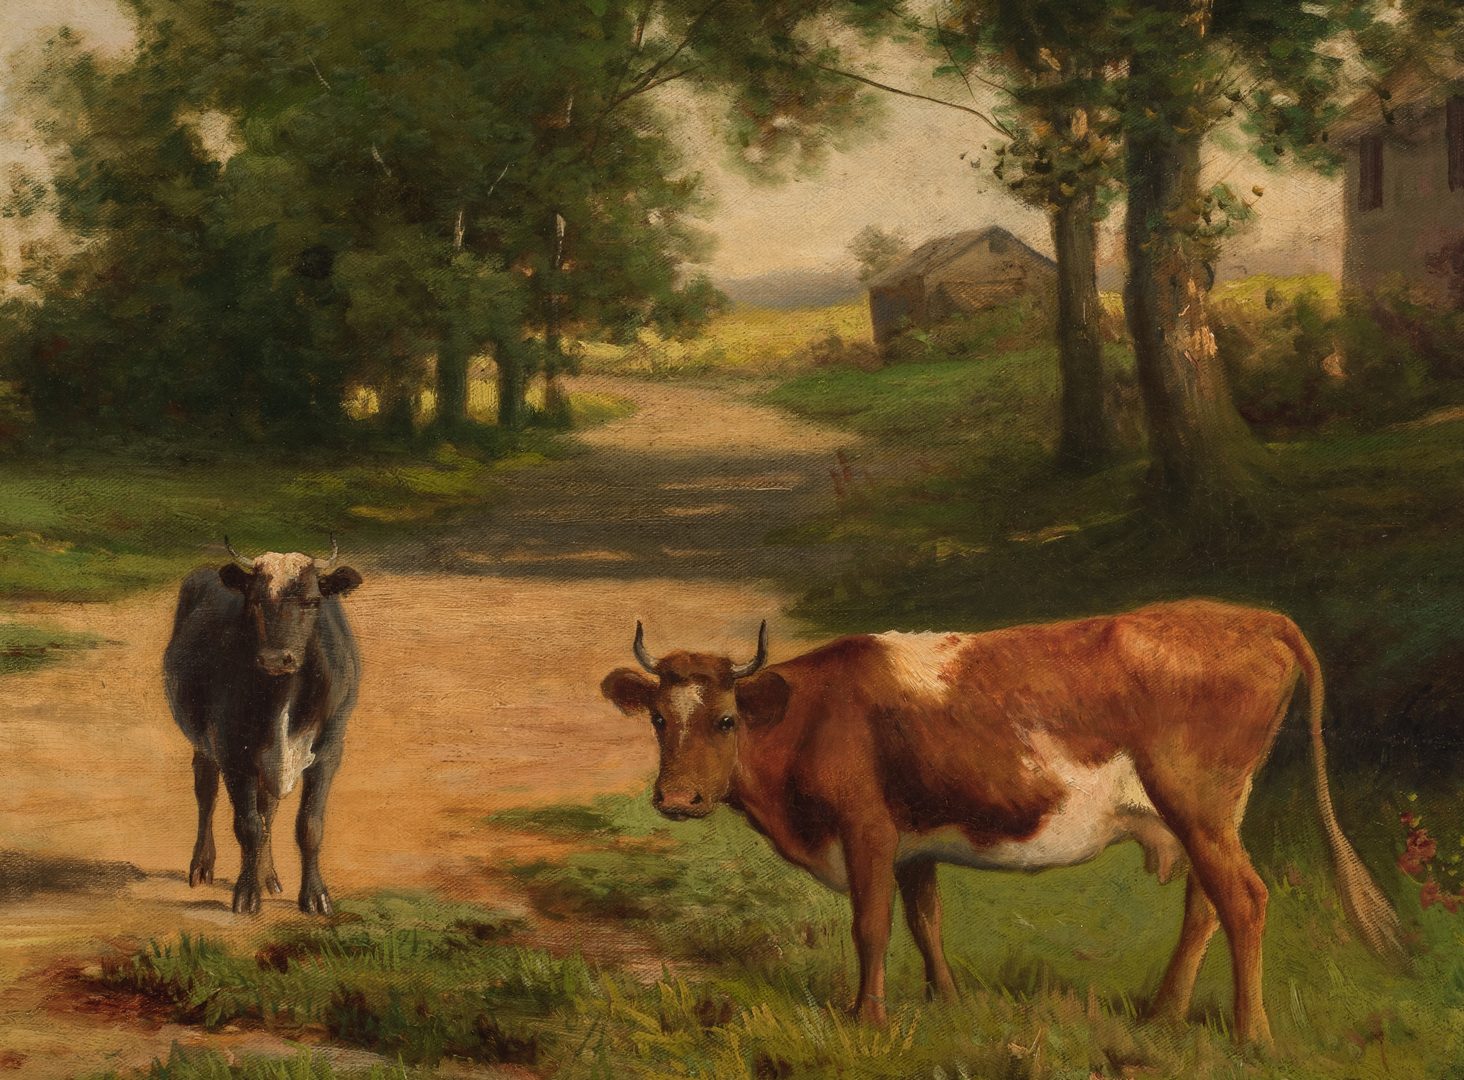 Lot 111: Robert Atkinson Fox, O/C, Cows on Country Road